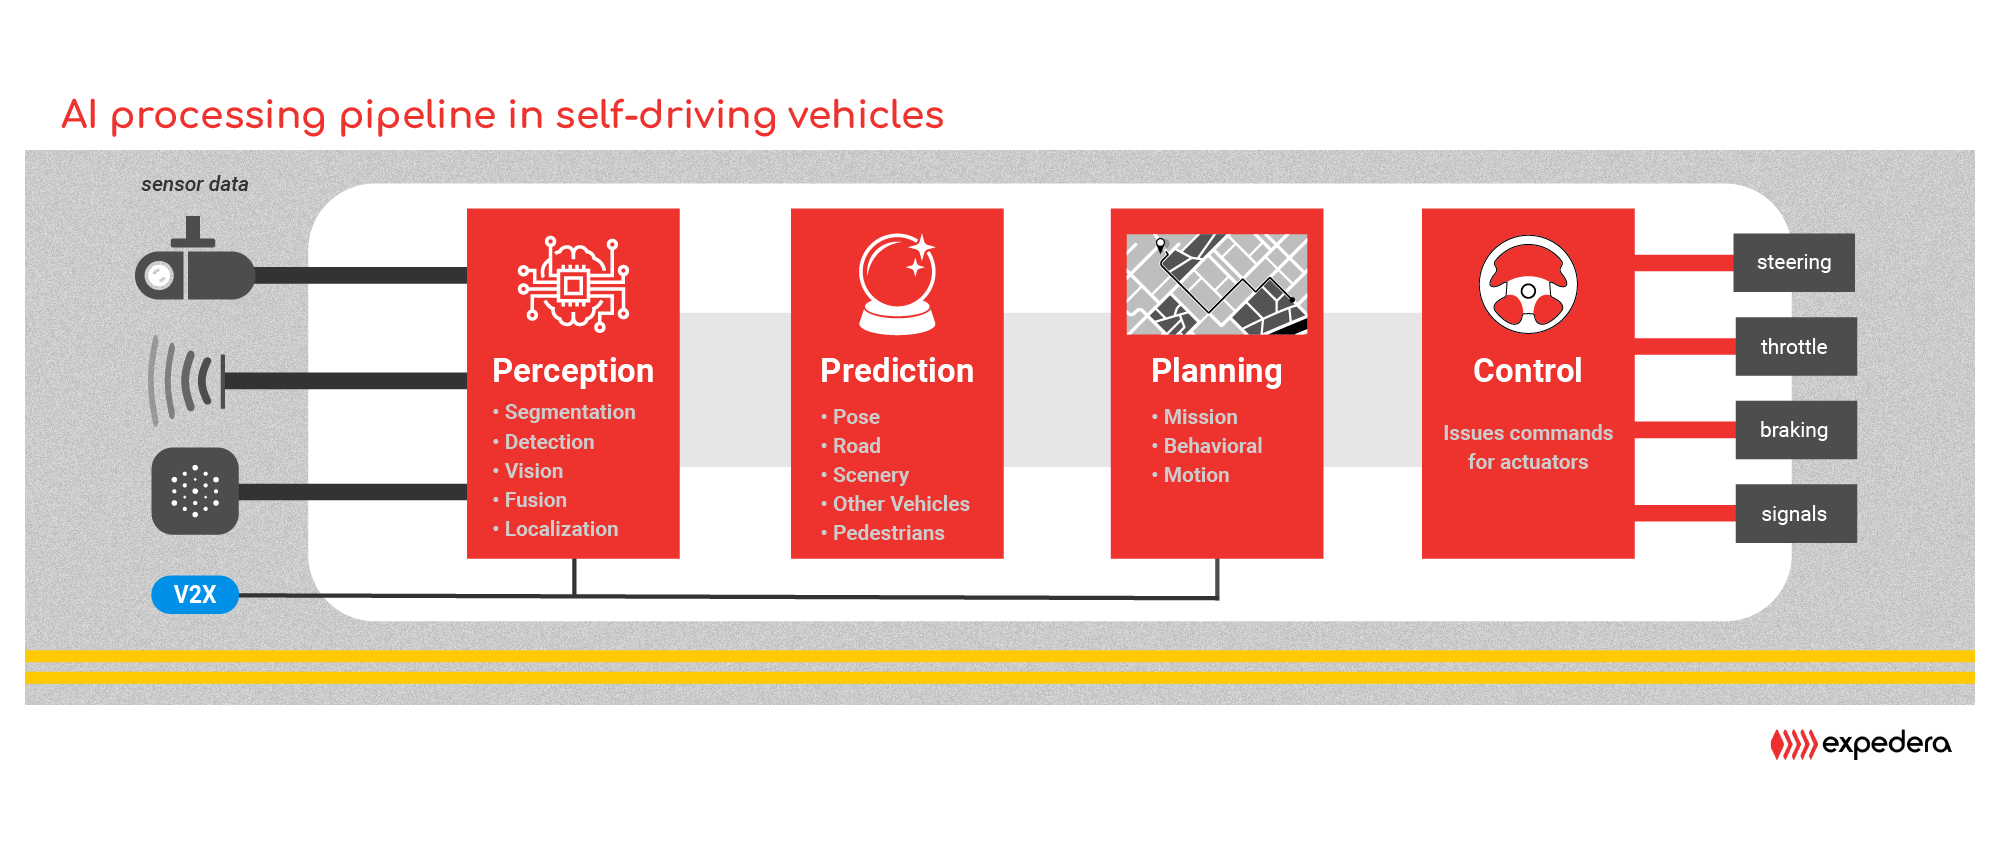 Ultra-efficient heterogeneous SoCs target the AI processing pipeline for Level 5 self-driving